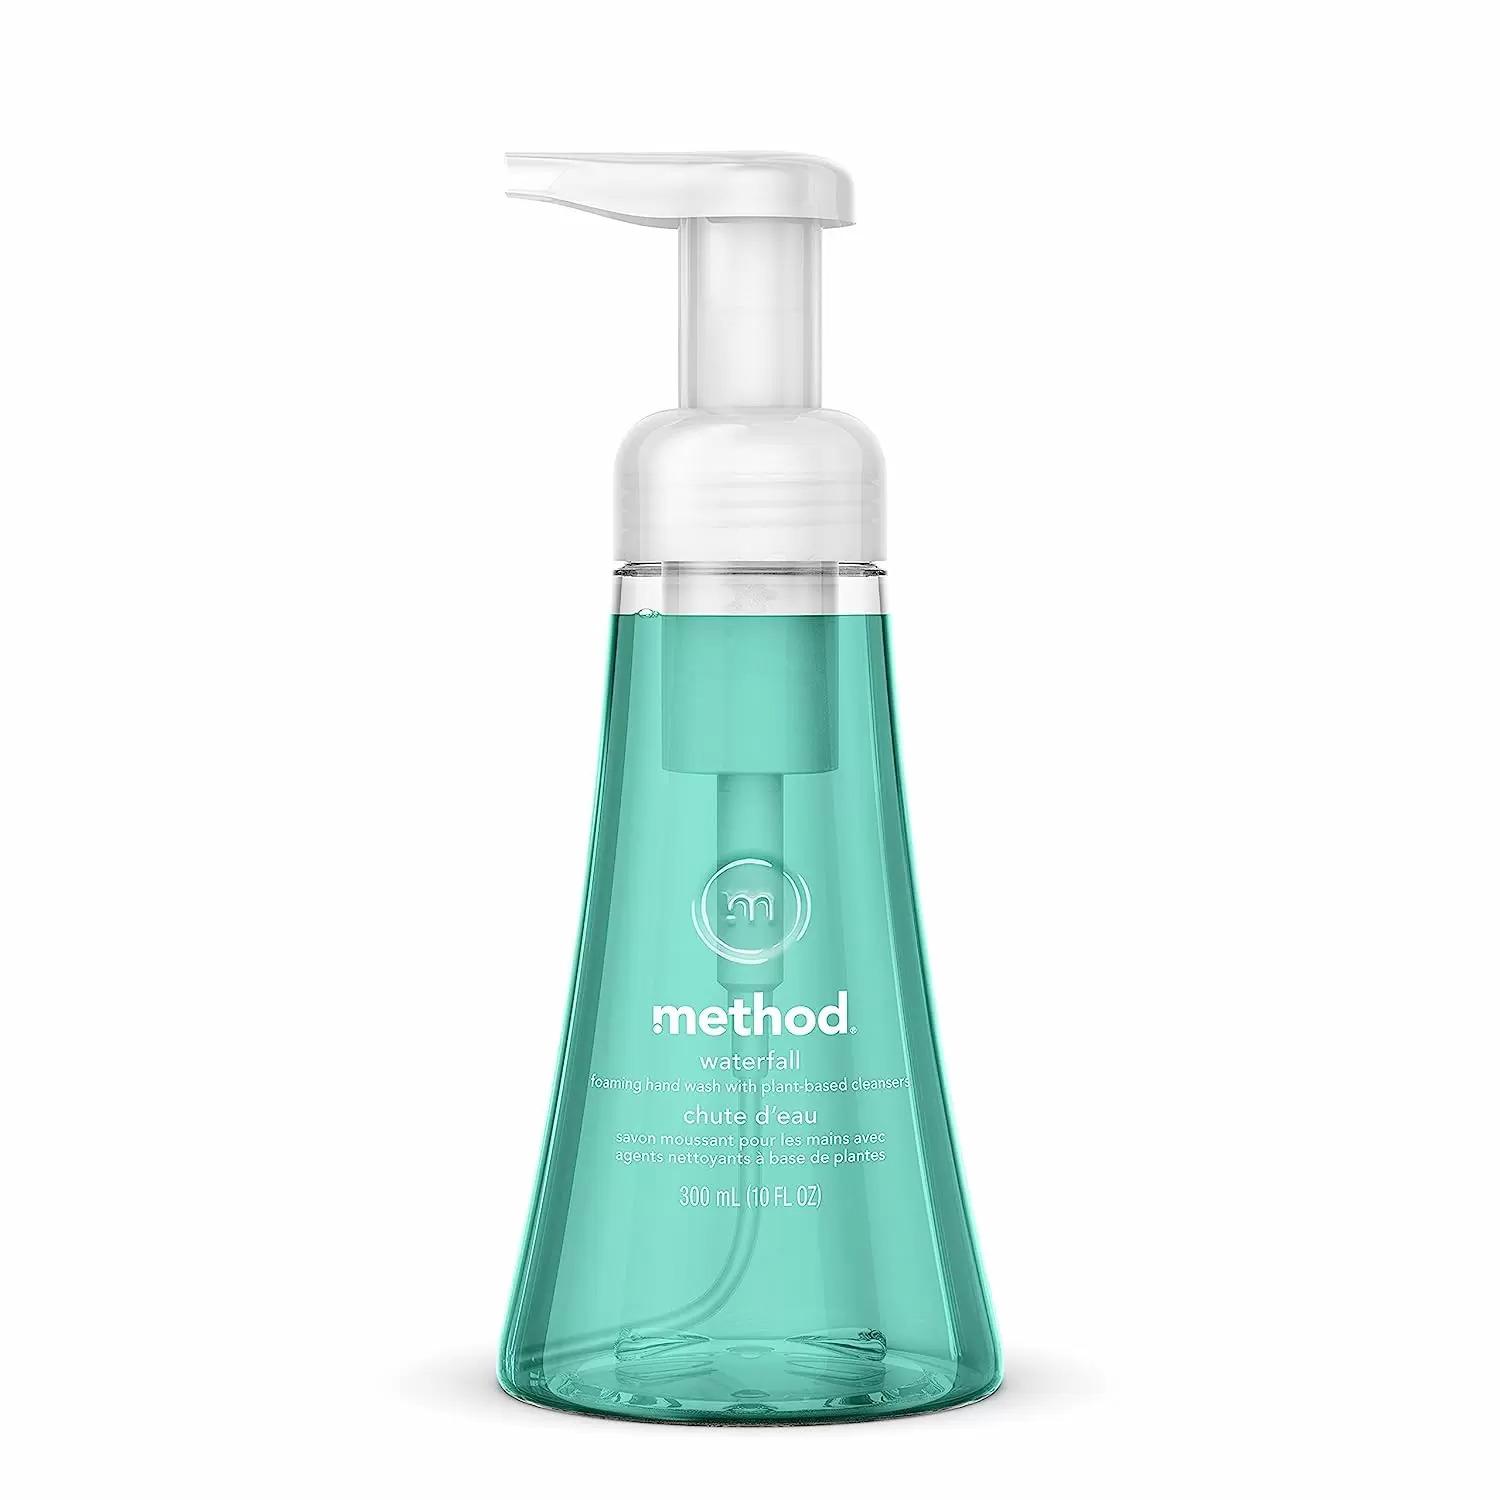 Method Foaming Hand Soap Waterfall for $2.33 Shipped